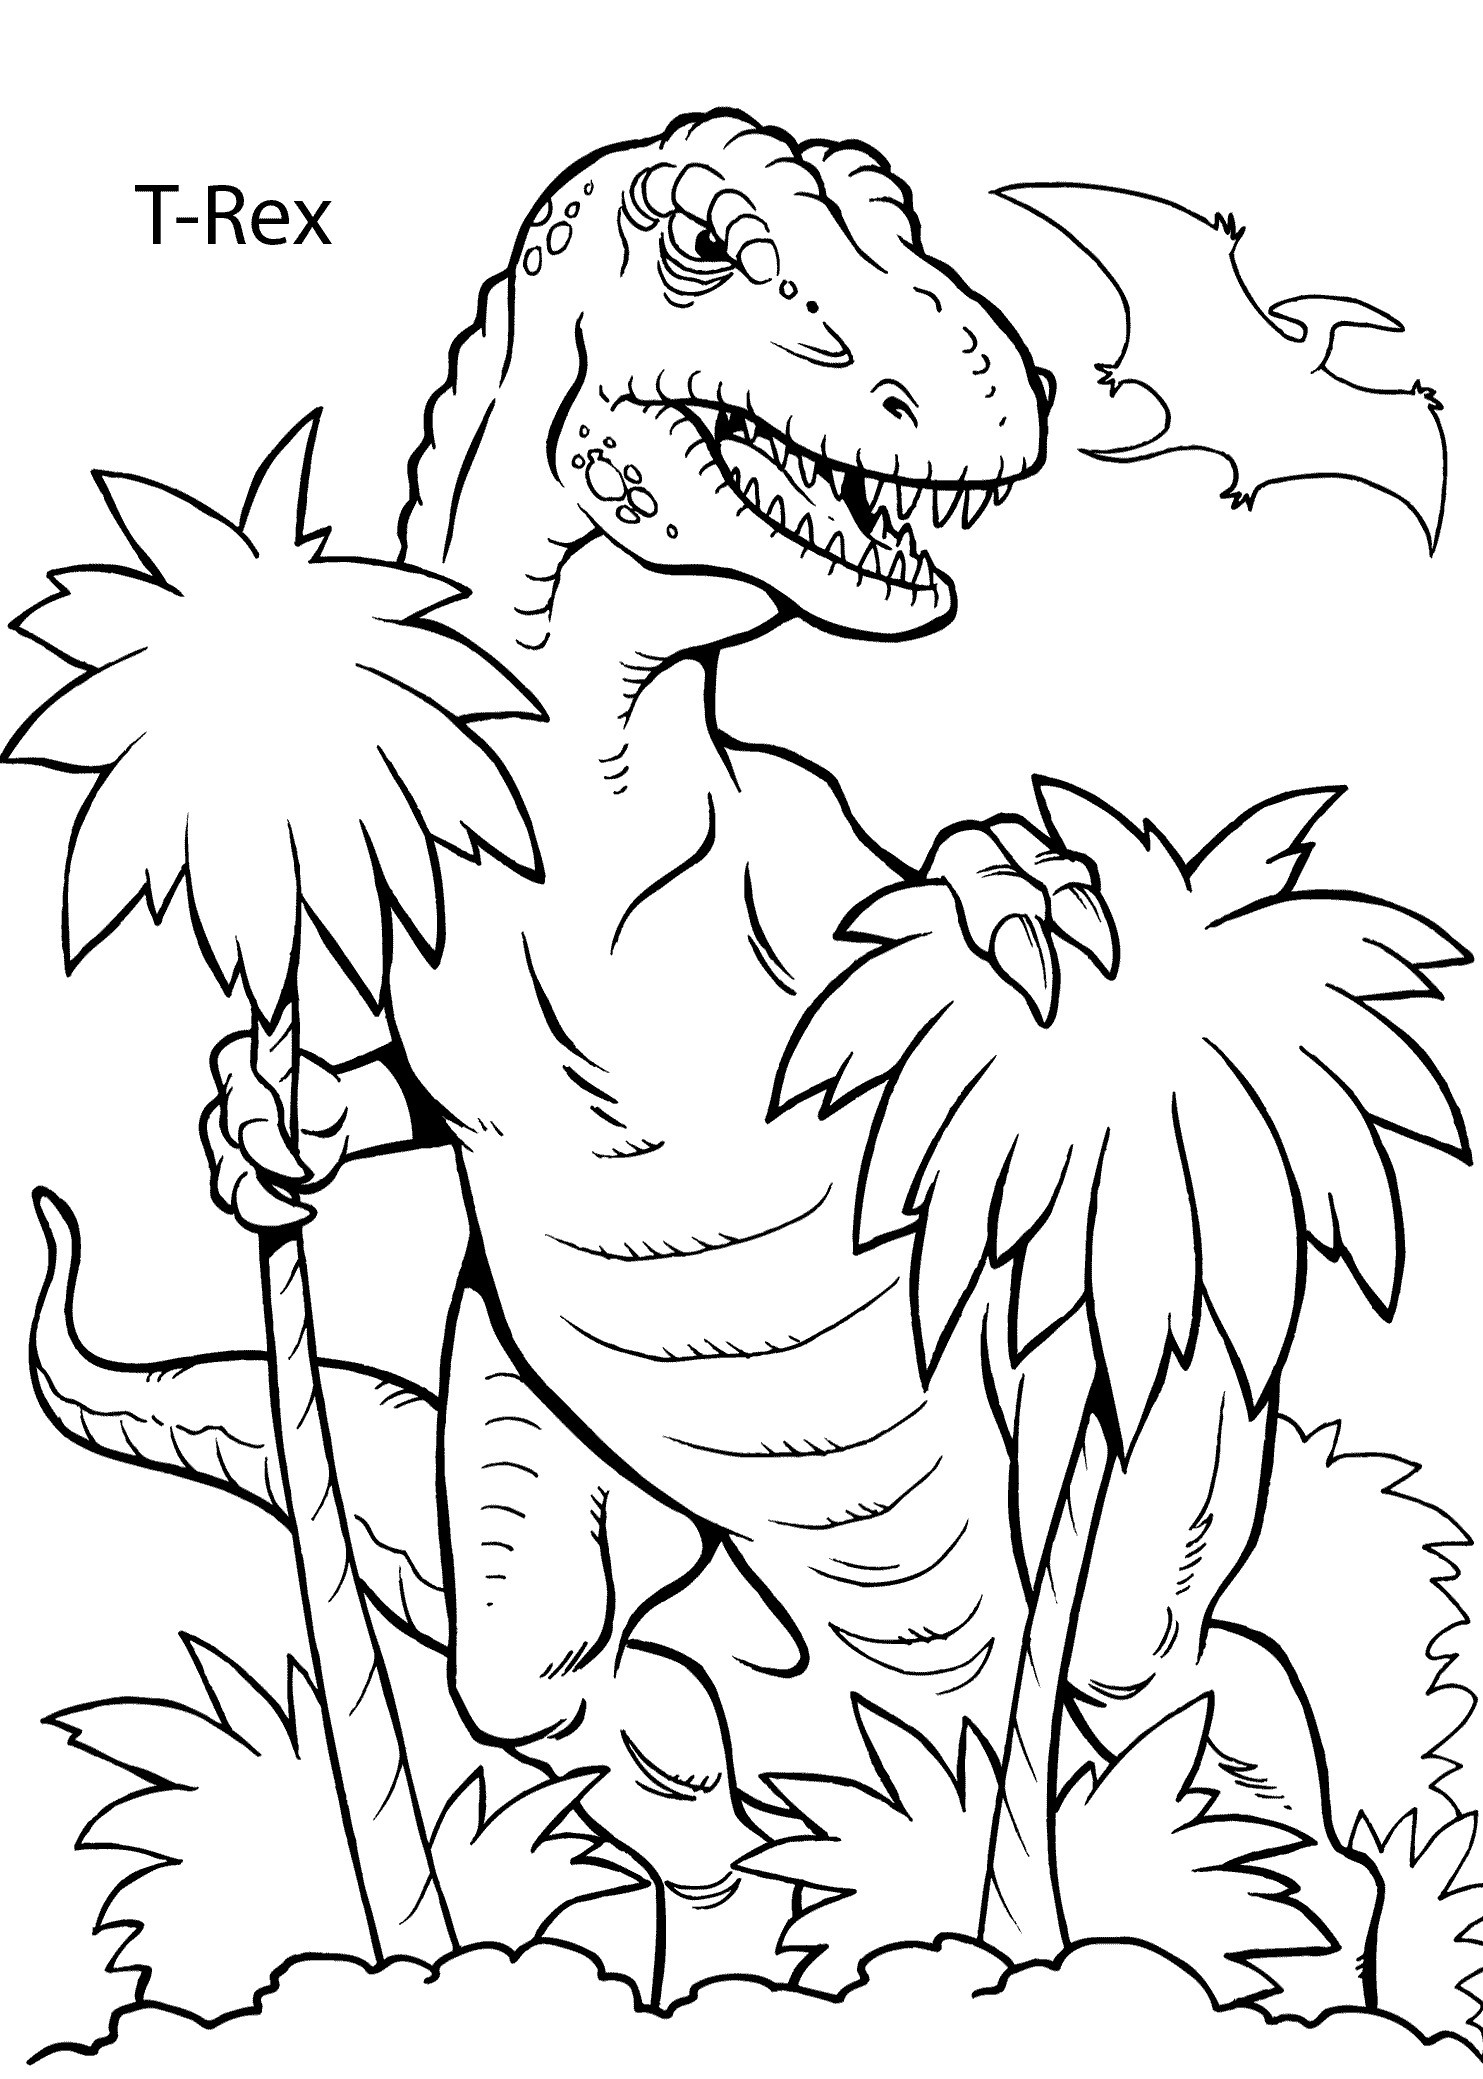 Dinosaur Coloring Pages Inspirational T Rex Dinosaur Coloring Pages for Kids Printable Free